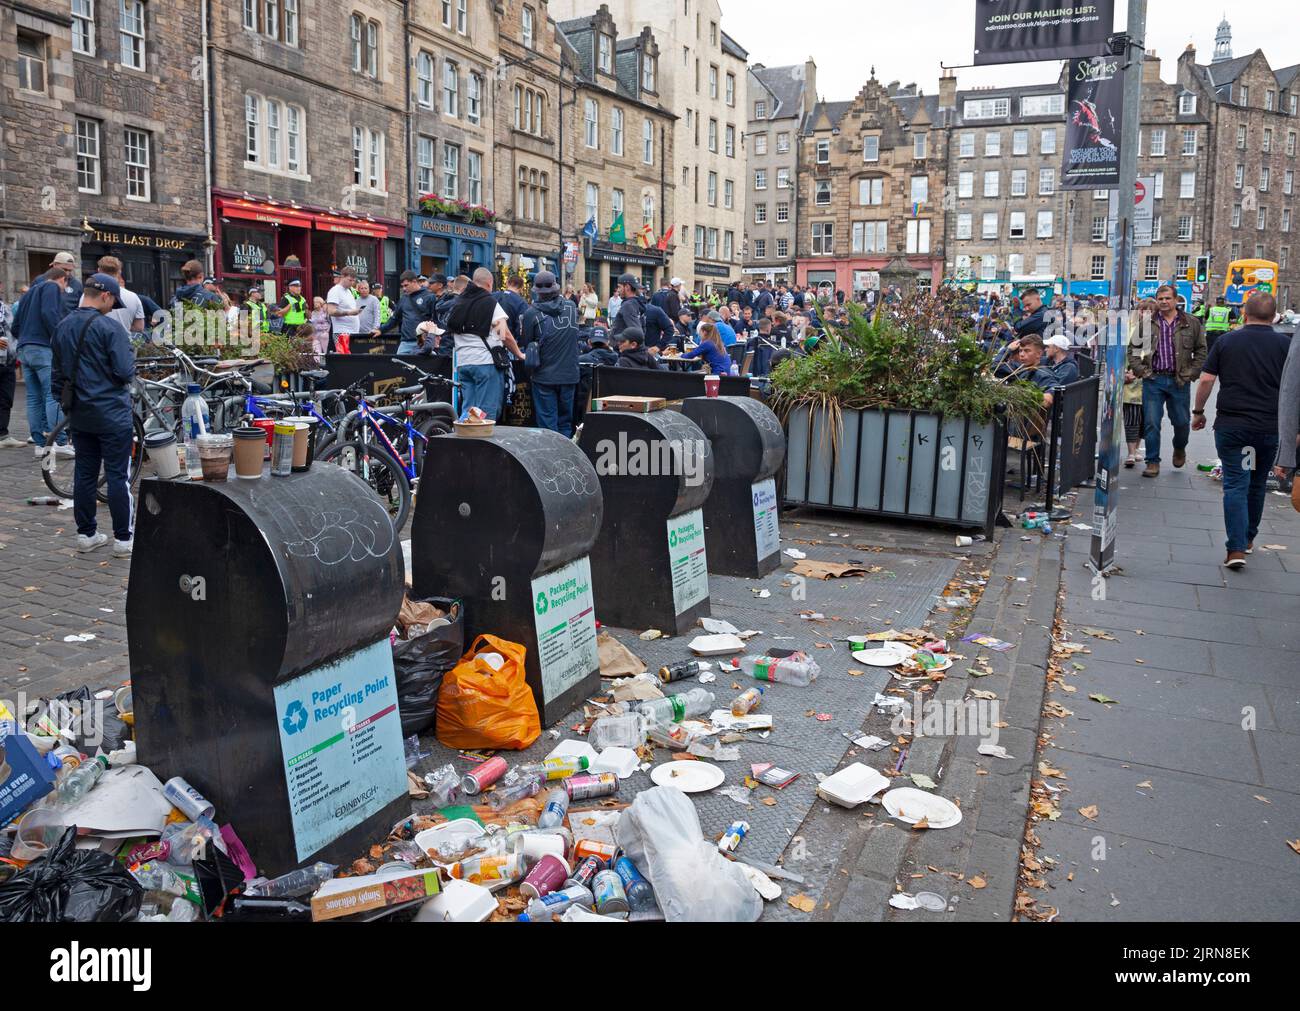 City centre Edinburgh, Scotland, UK. 25th August 2022. Cloudy but mild 19 degrees centigrade for the FC Zurich fans who gathered surrounded by Police Officers in the untidy Grassmarket to peacefully socialise before this evening's game with Heart of Midlothian. Also, smaller crowds in the Royal Mile for street performers. Pictured: Rubbish still piled up at refuse bins due to strike with FC Zurich fans in background having a drink in the Grassmarket. Credit: ArchWhite/alamy live news. Stock Photo